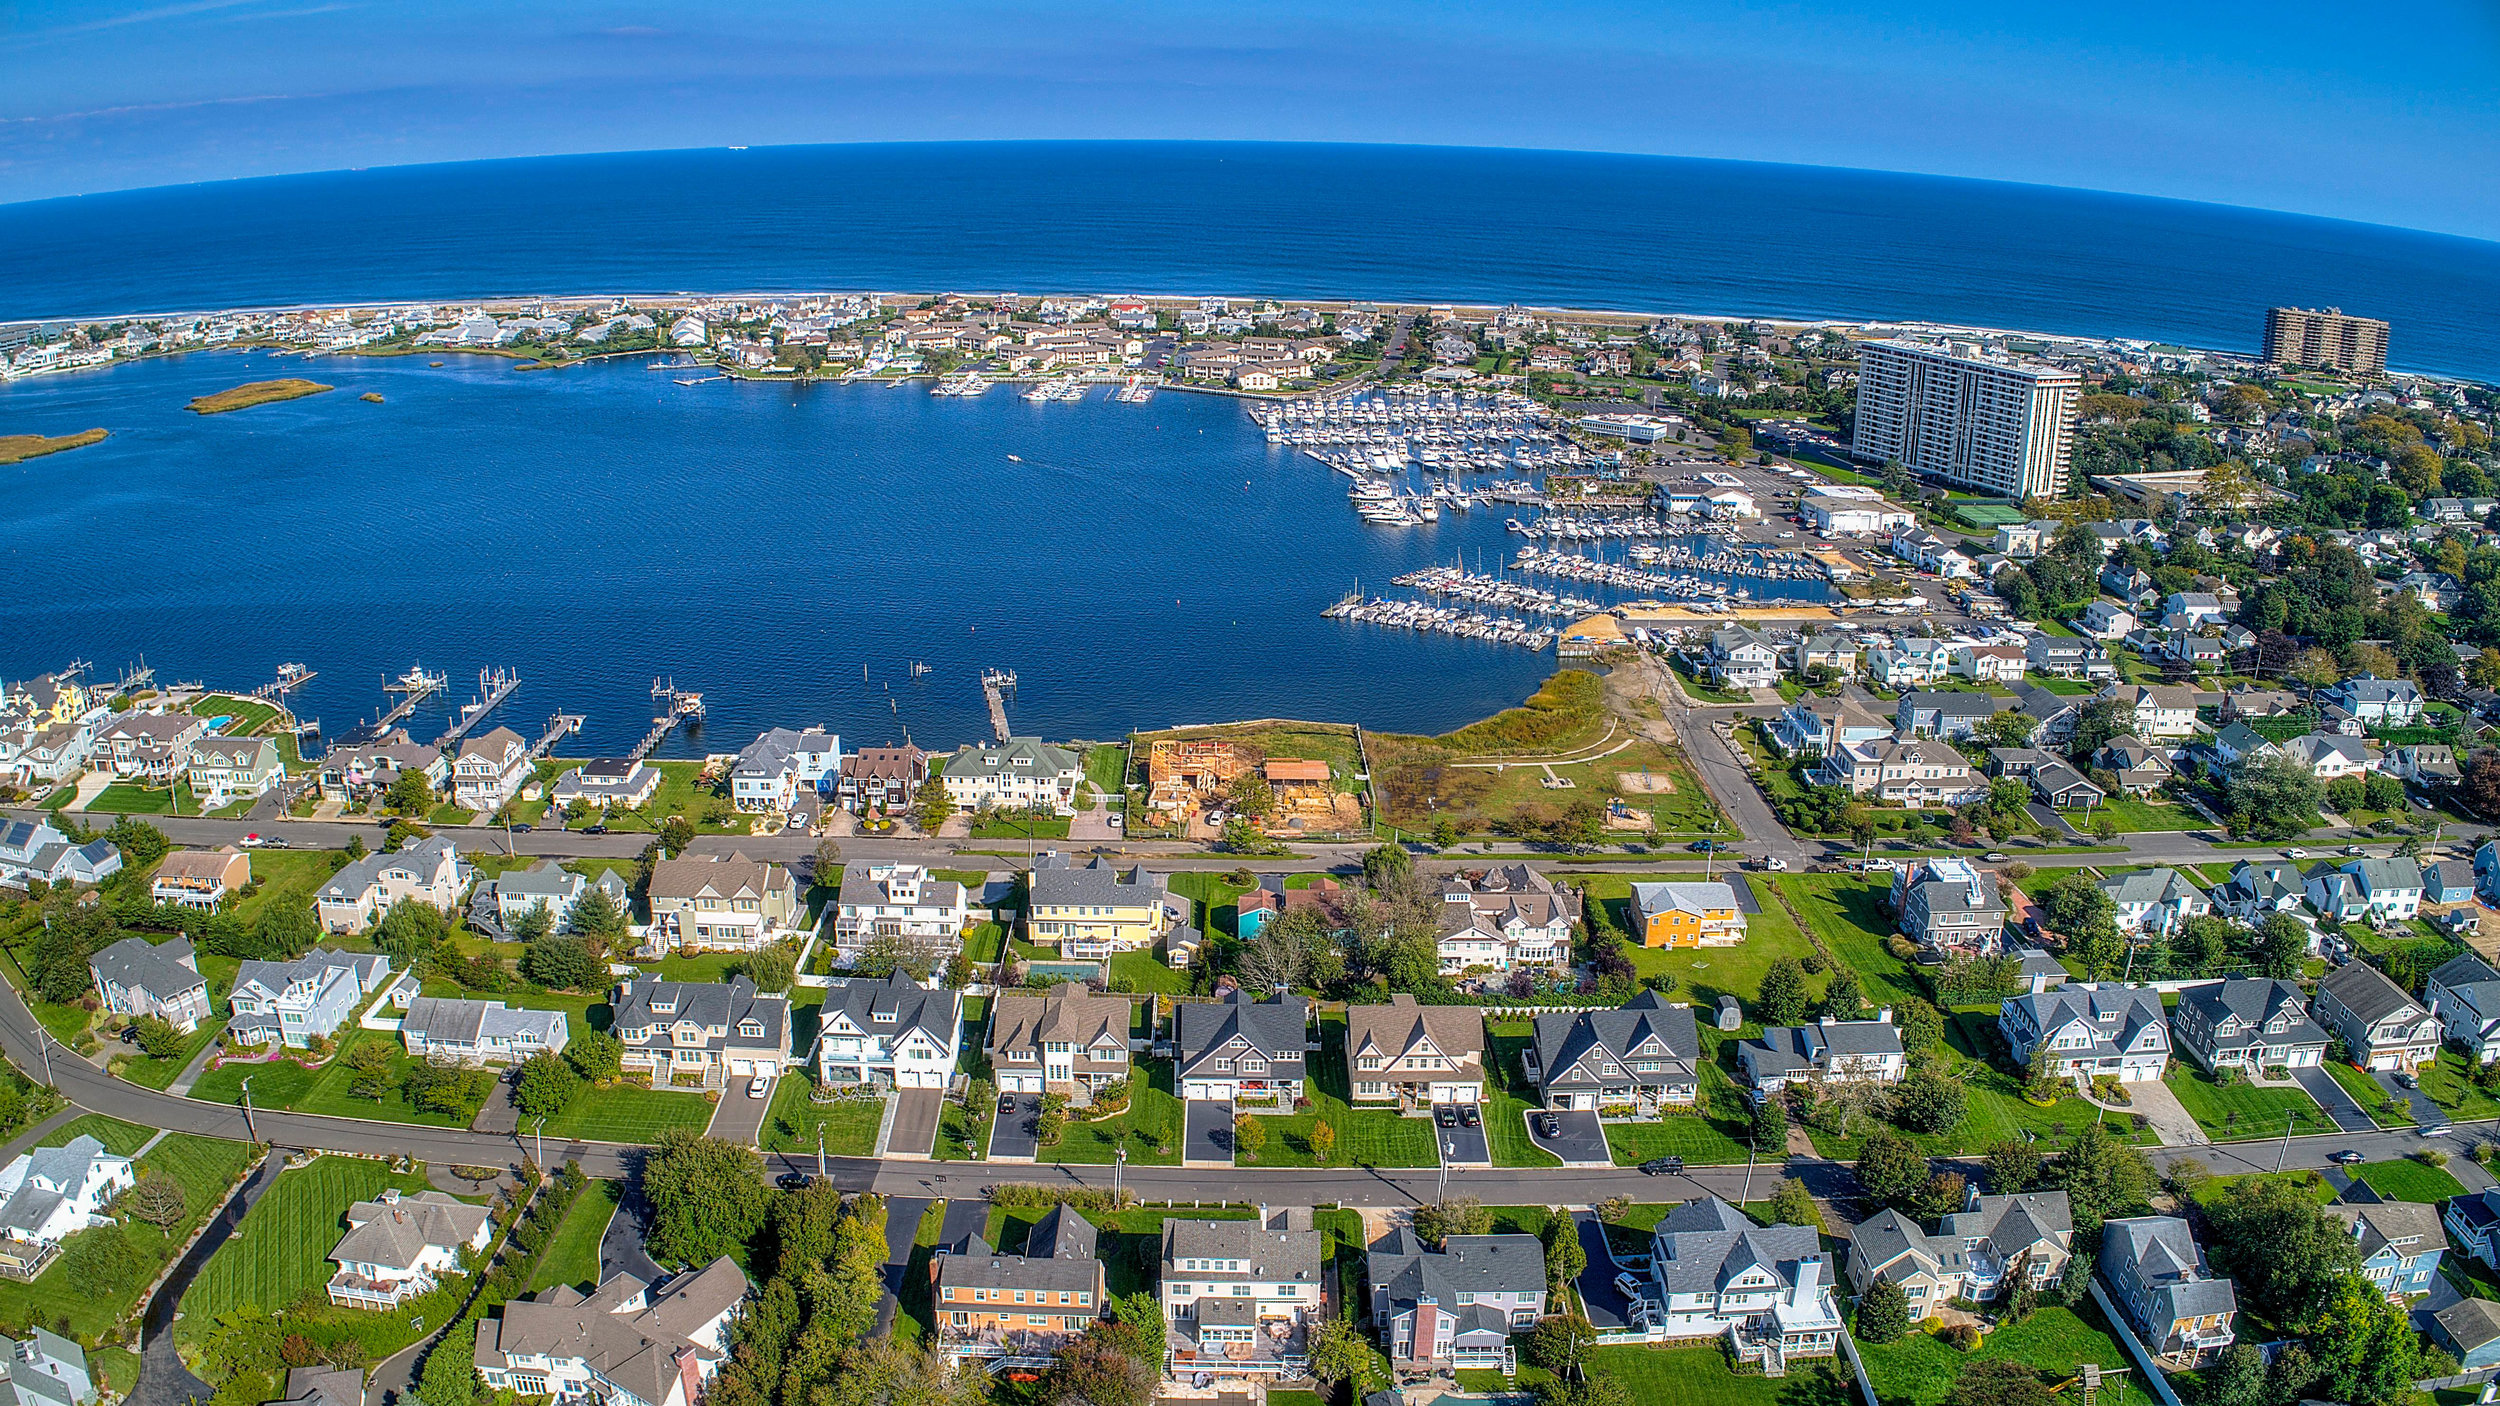 Navesink Monmouth Beach New Jersey real estate aerial drone photo NJ